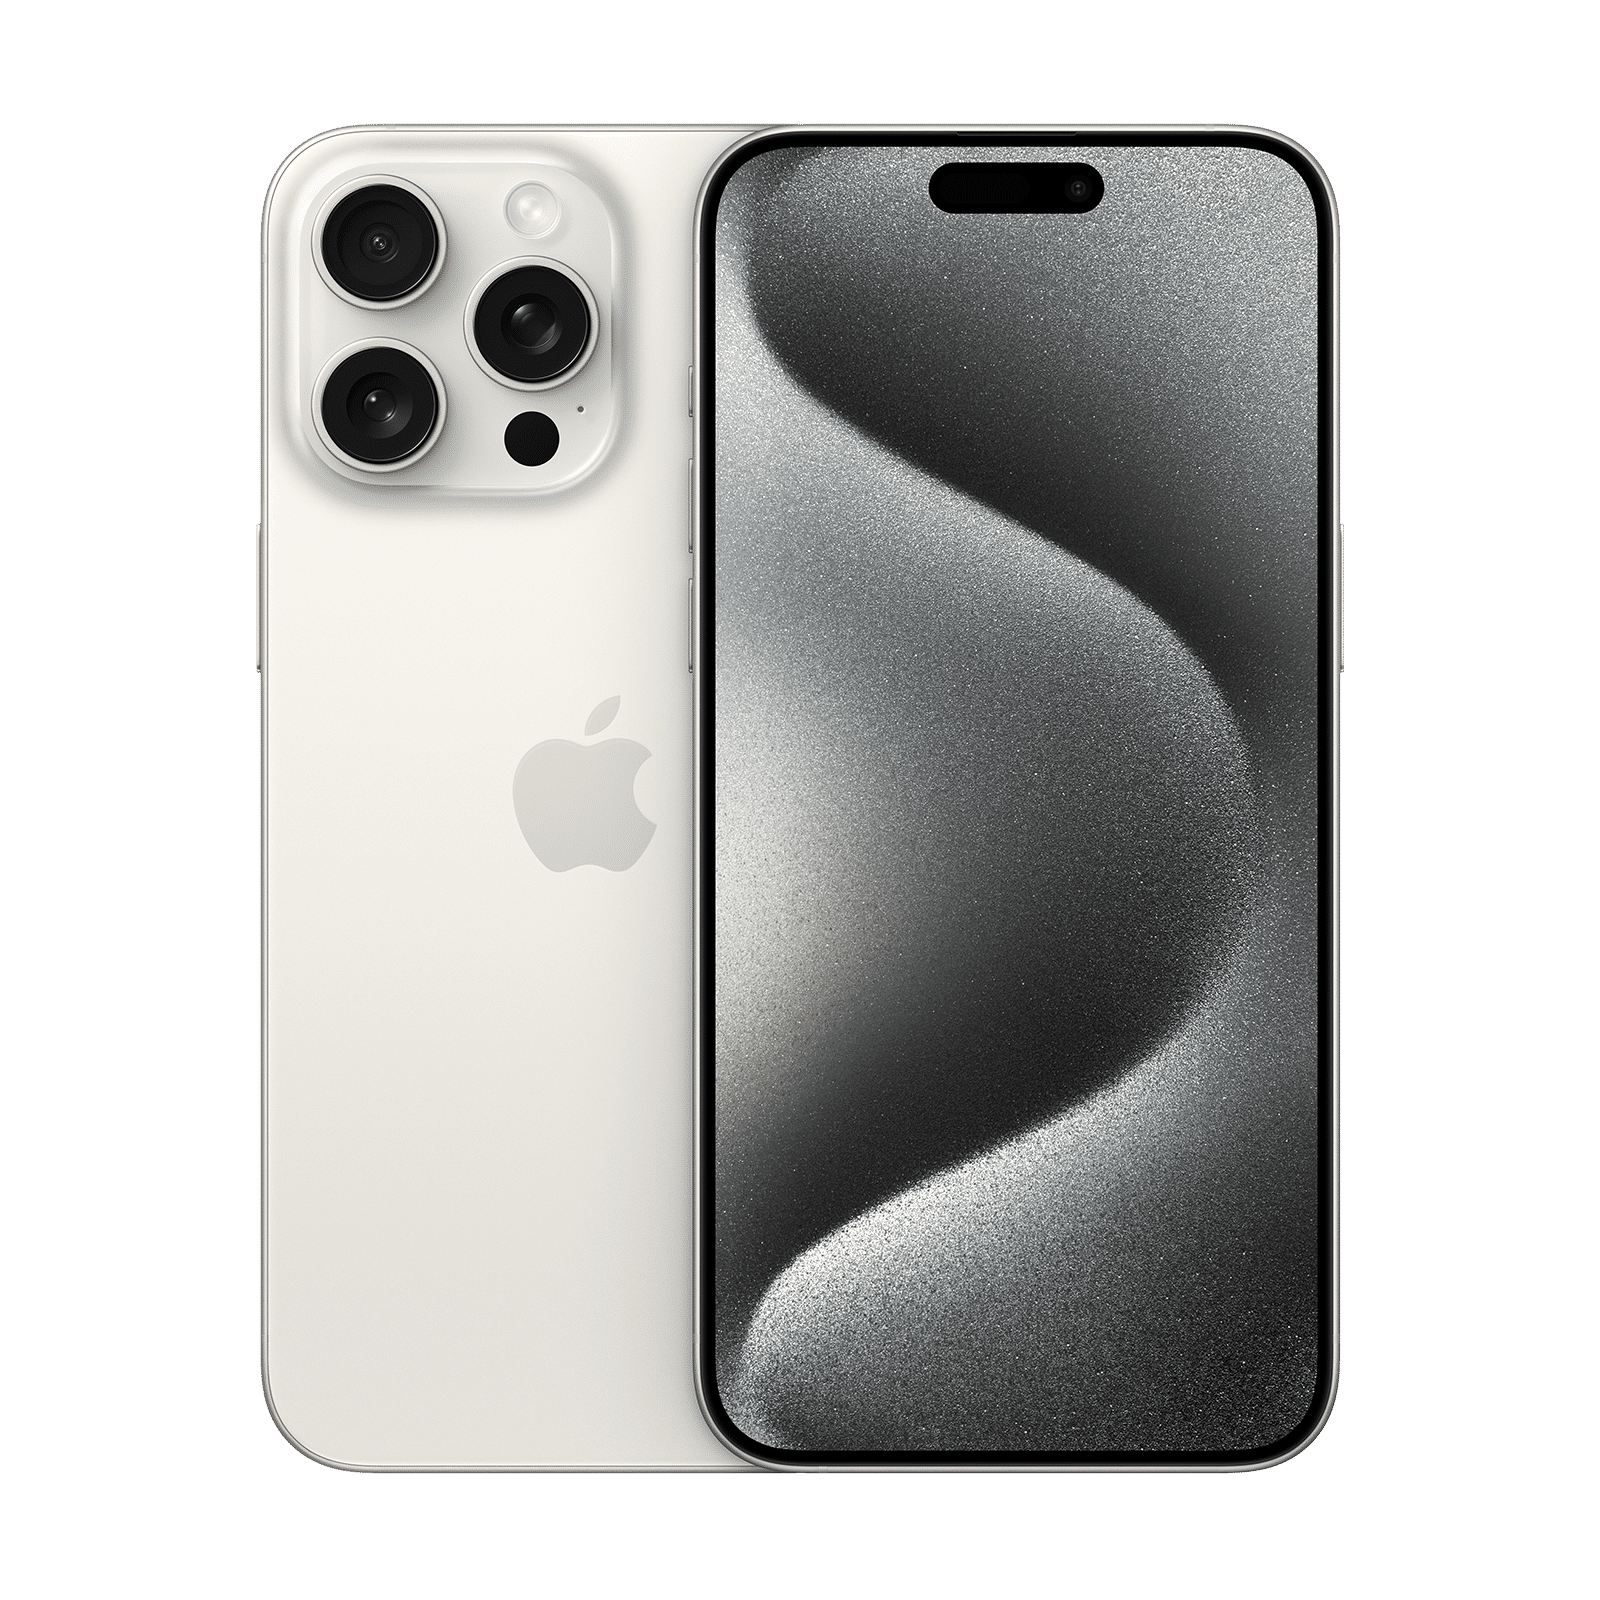 Apple iPhone 15 Pro, iPhone 15 Pro Max launched in India at a